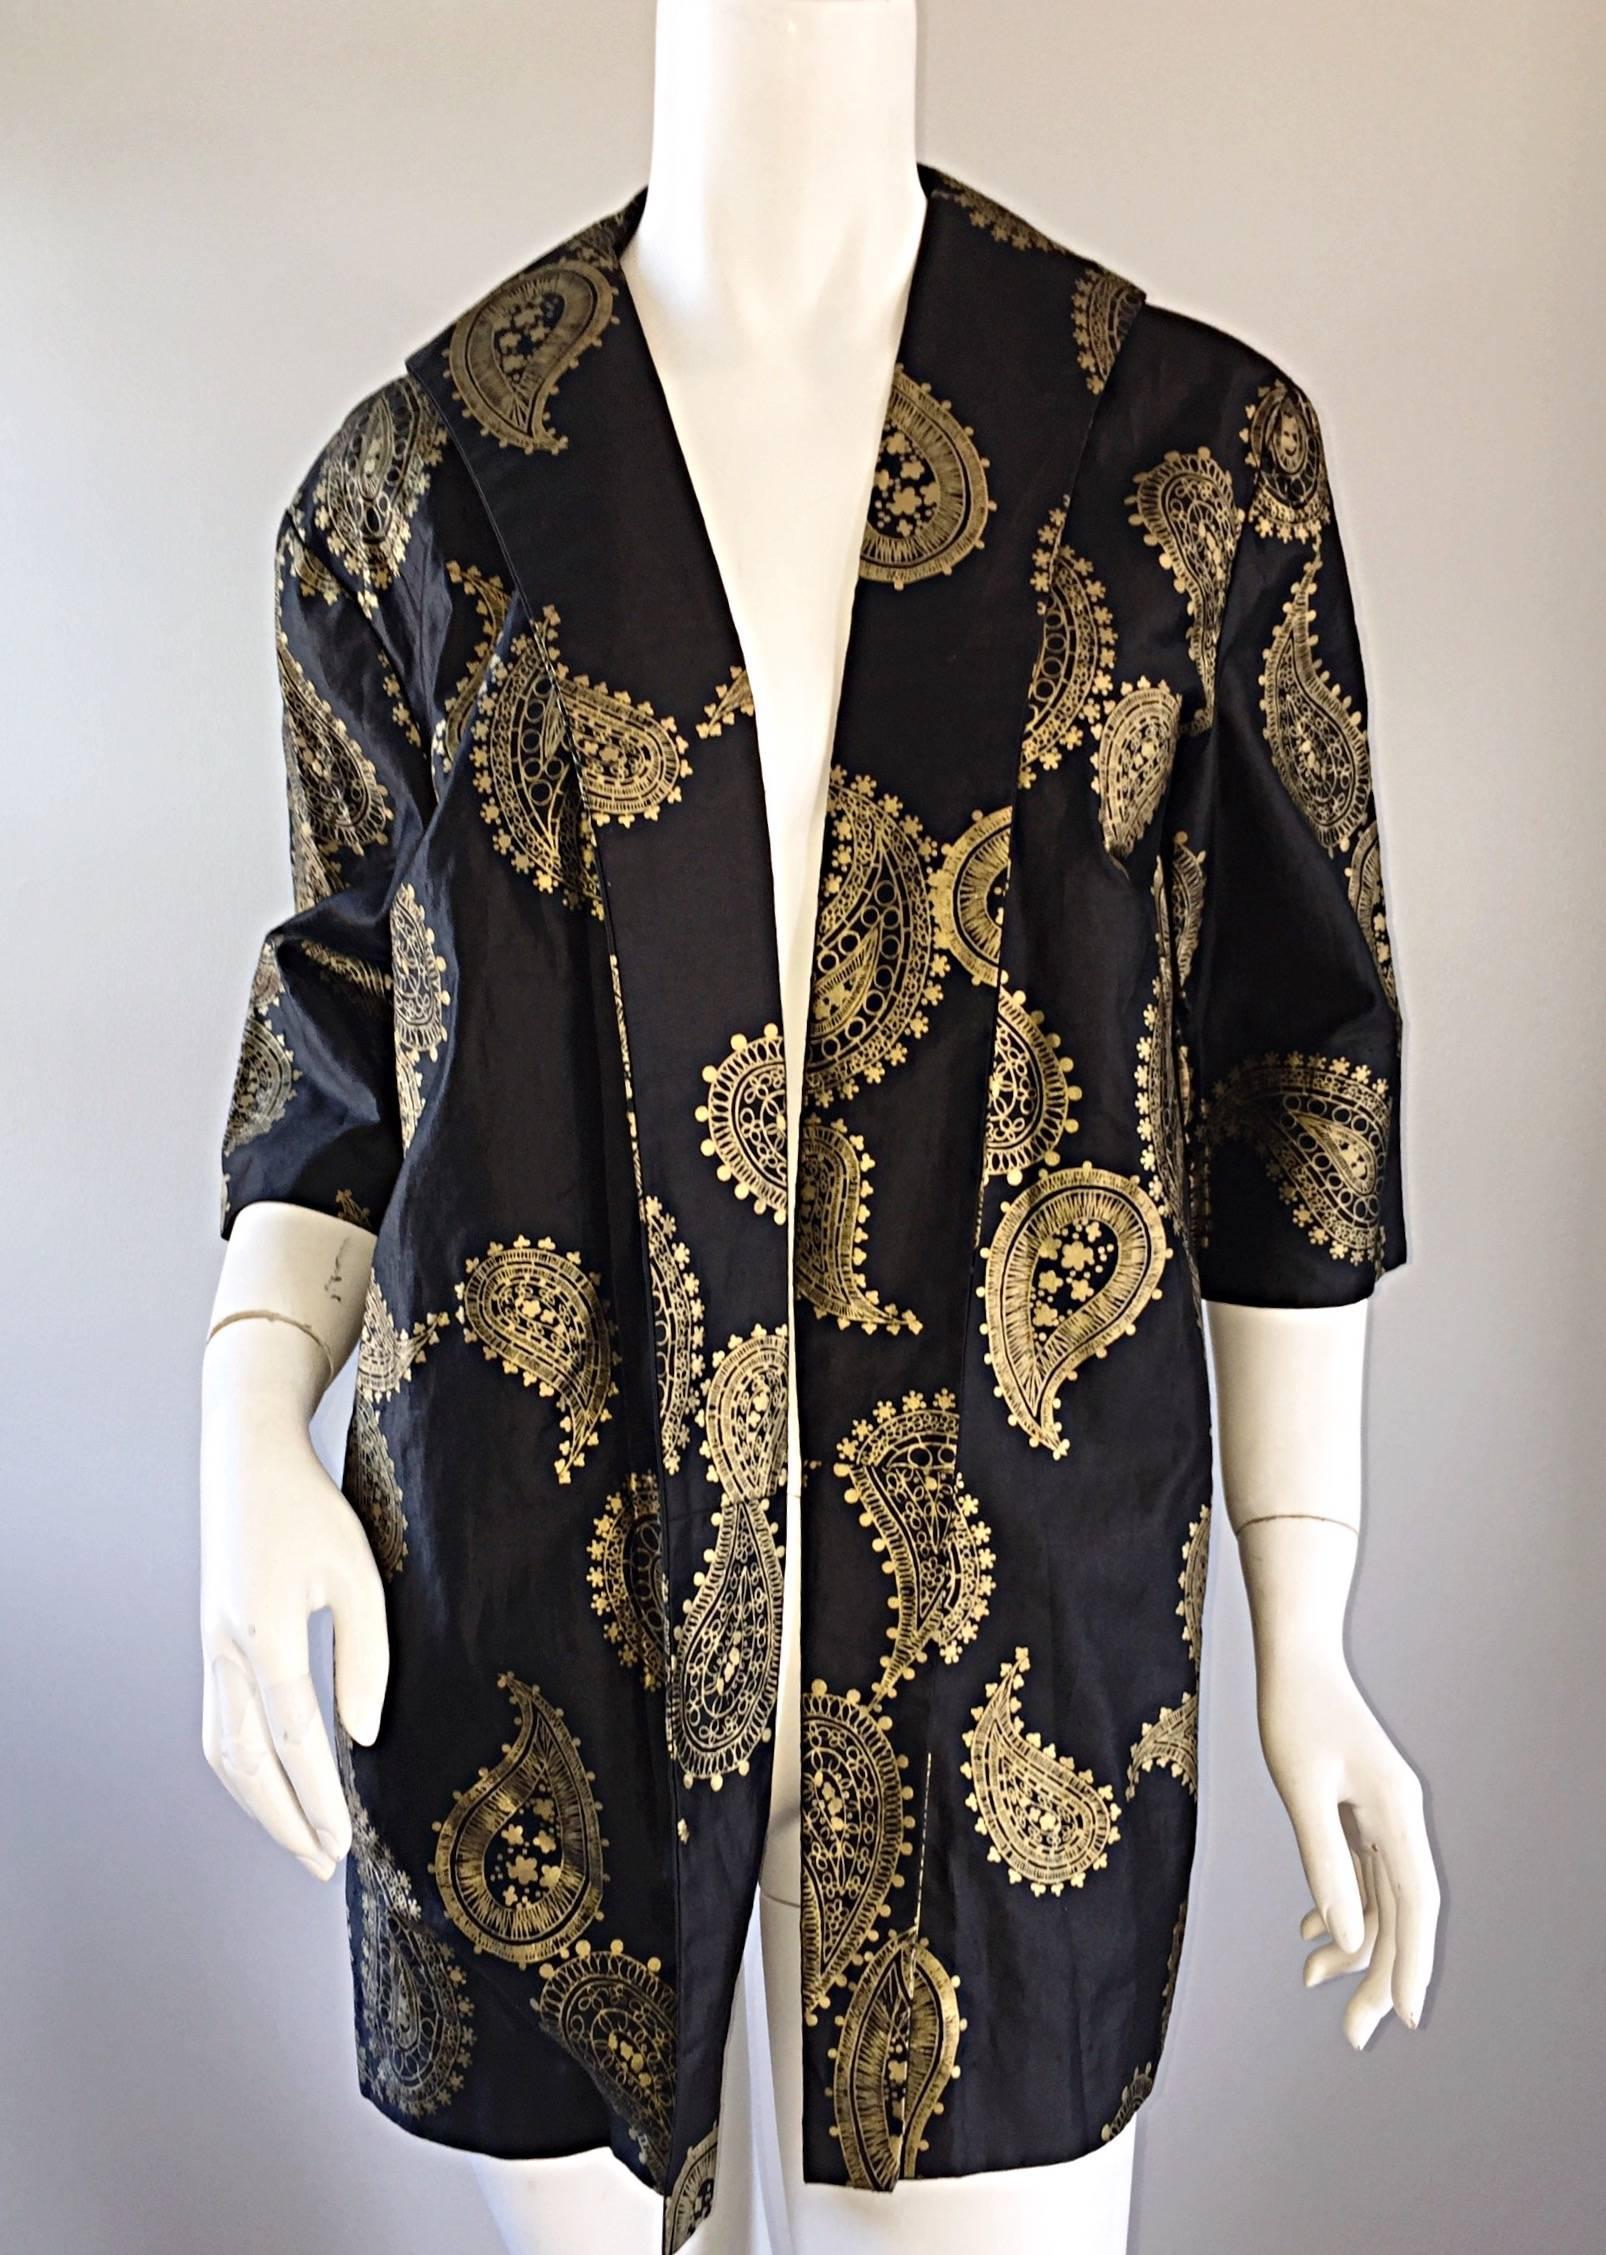 Women's Rare 1950s Alfred Shaheen Vintage 50s Black And Gold Hand Printed Kimono Jacket